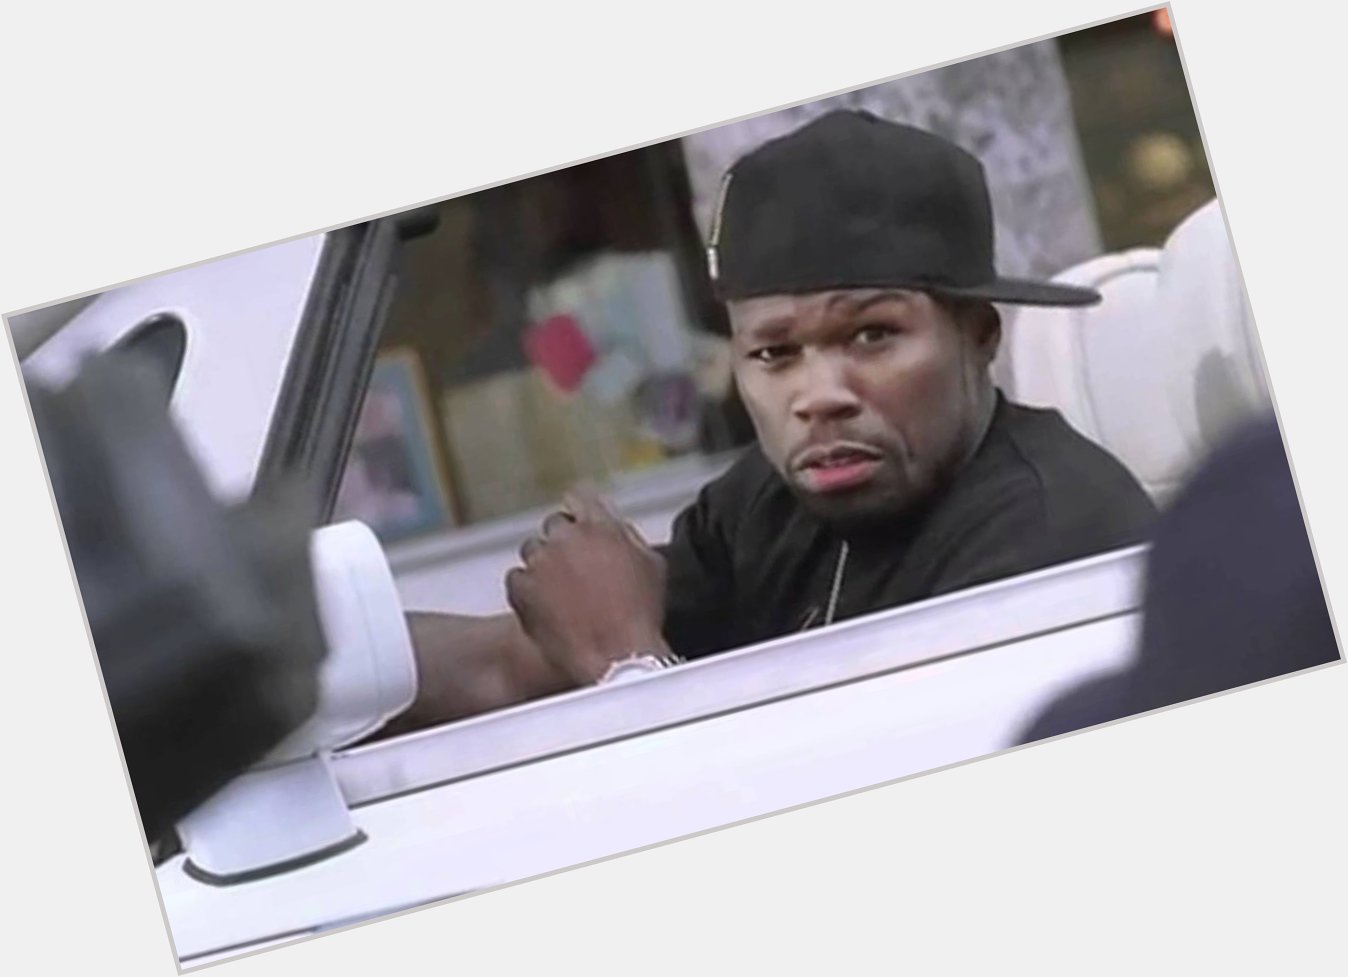 I see birthday messages flooding message. Happy birthday, Boyd.

50 cent says he has a song just for you. 